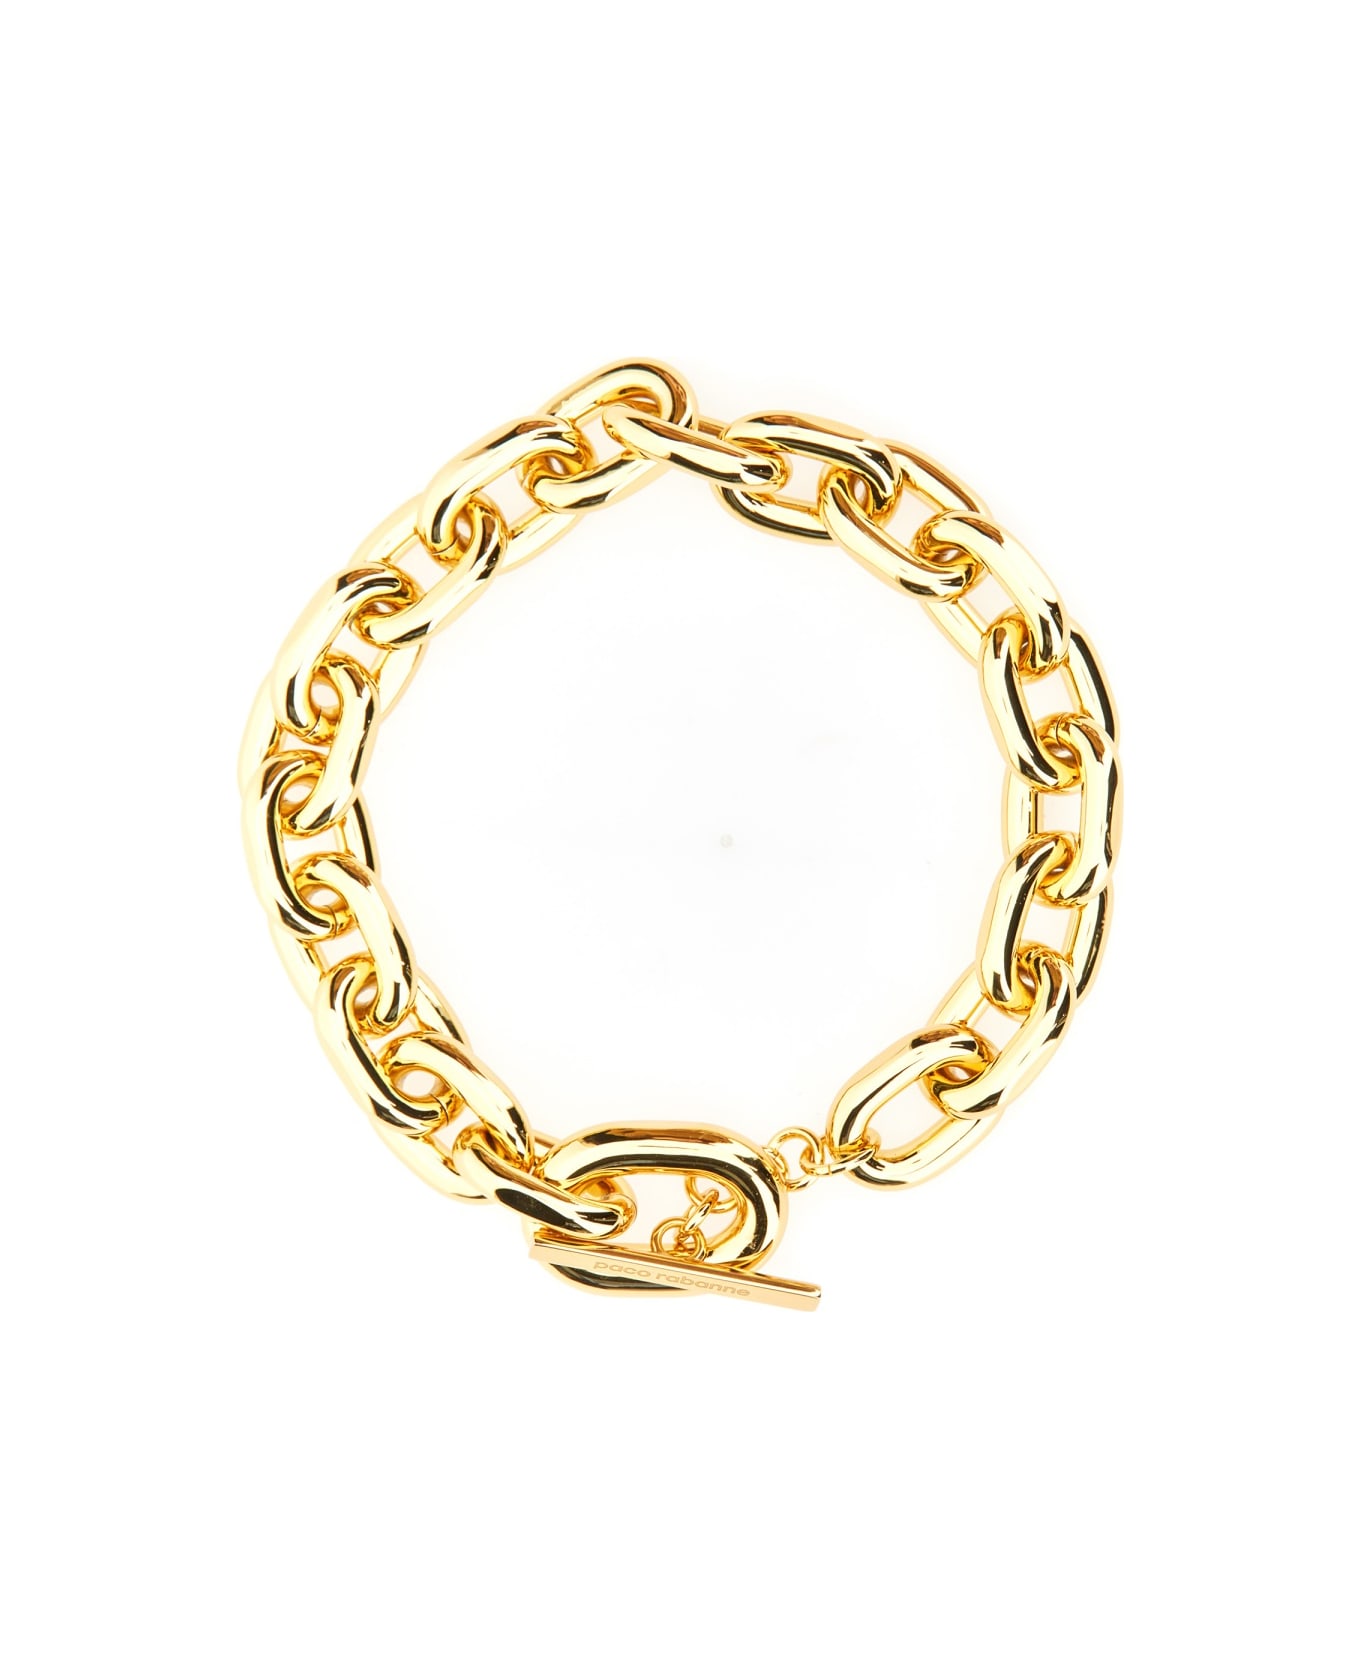 Paco Rabanne "xl Link" Necklace - GOLD